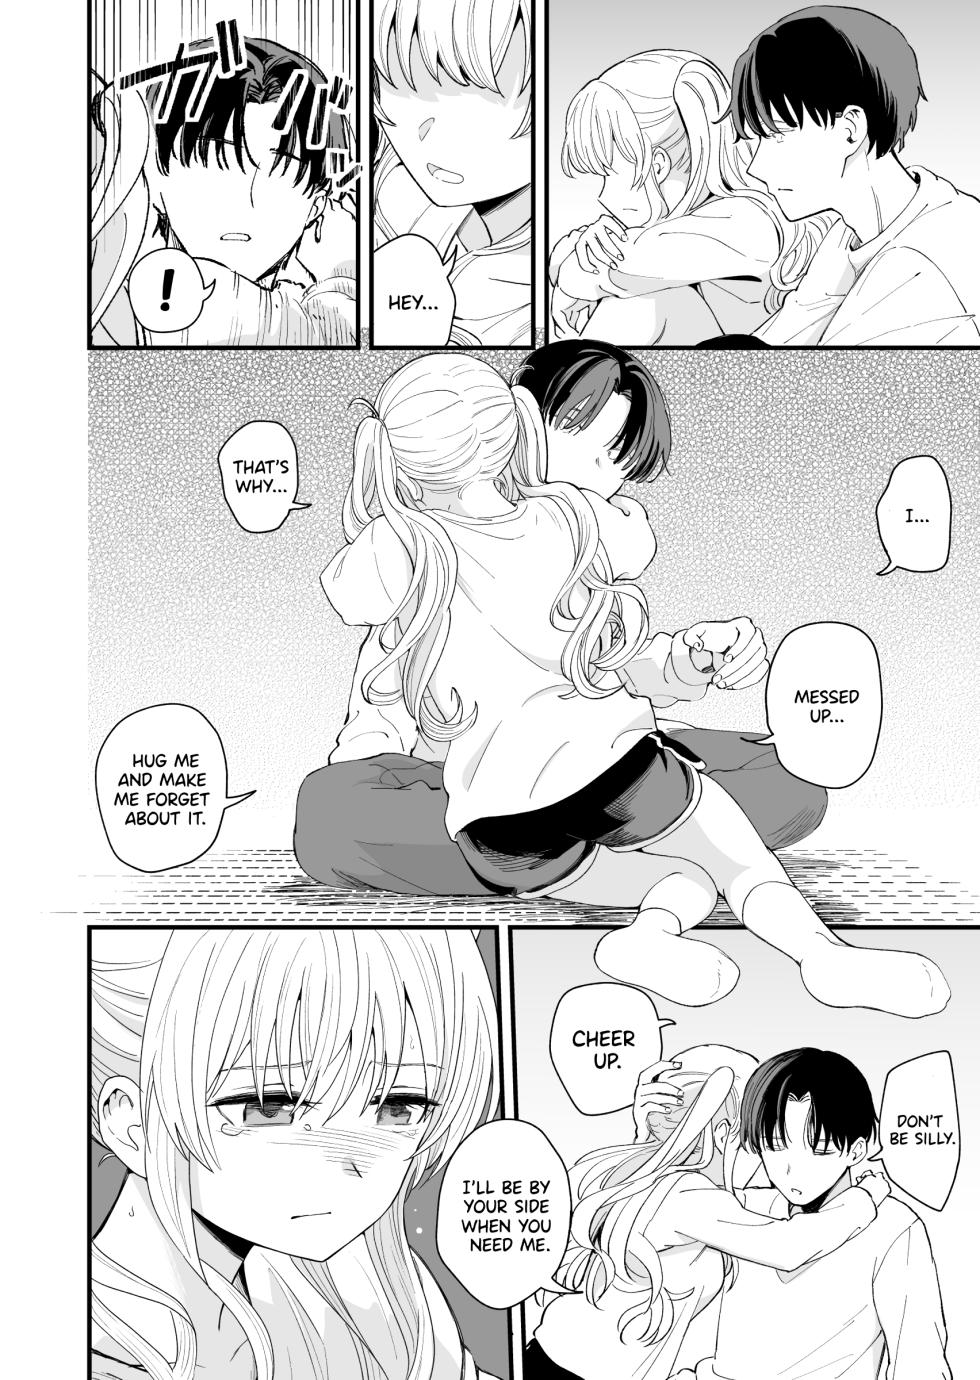 [Hiro no Ke (Hiro Hirono)] Sasete Kureru 3 no Gimai | A Younger Stepsister Who Only Has Sex With Me on Days That are Divisible by 3 or on Days That Include The Number 3. [English] [HeatManga] - Page 28